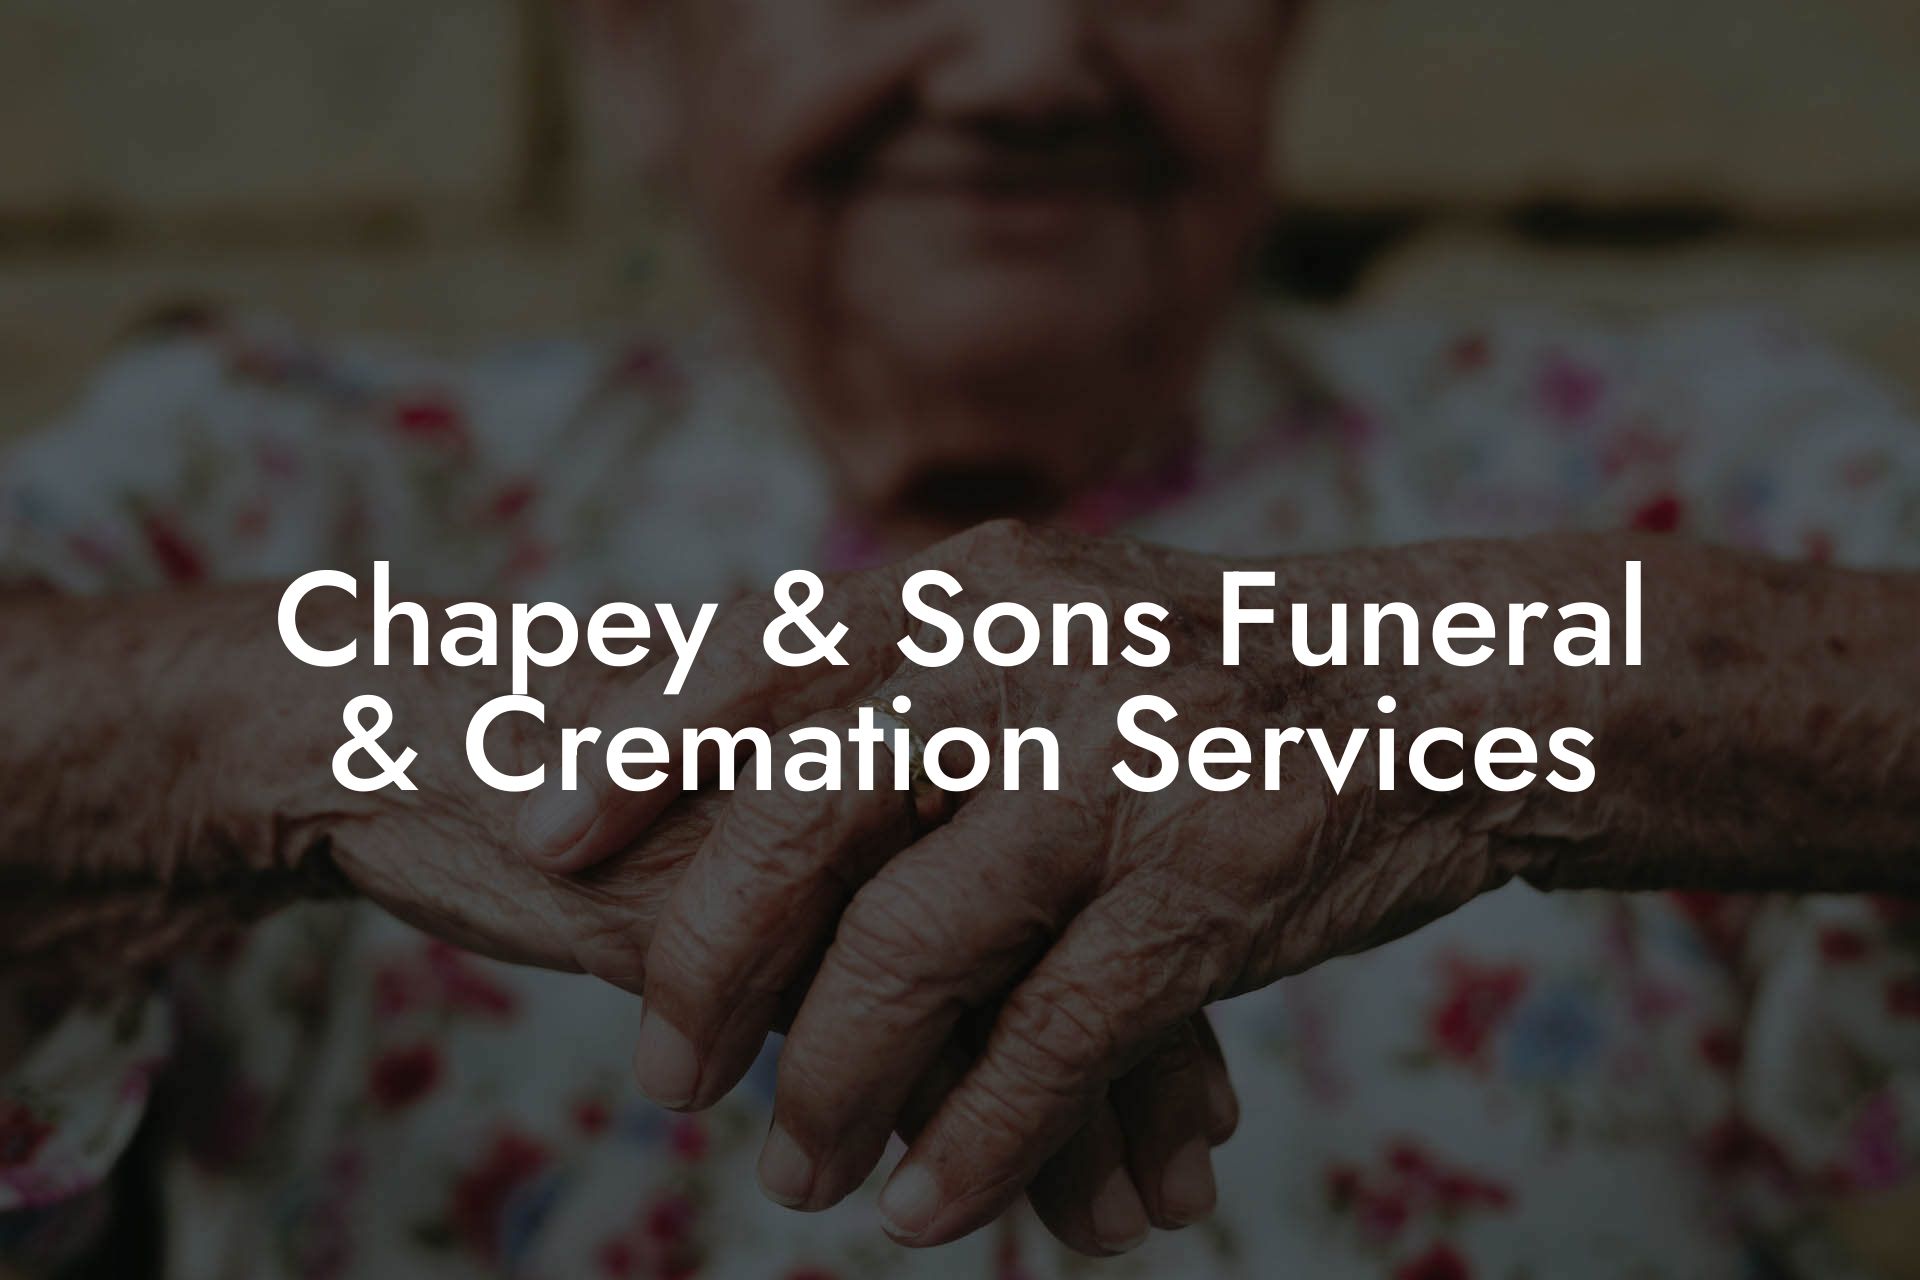 Chapey & Sons Funeral & Cremation Services